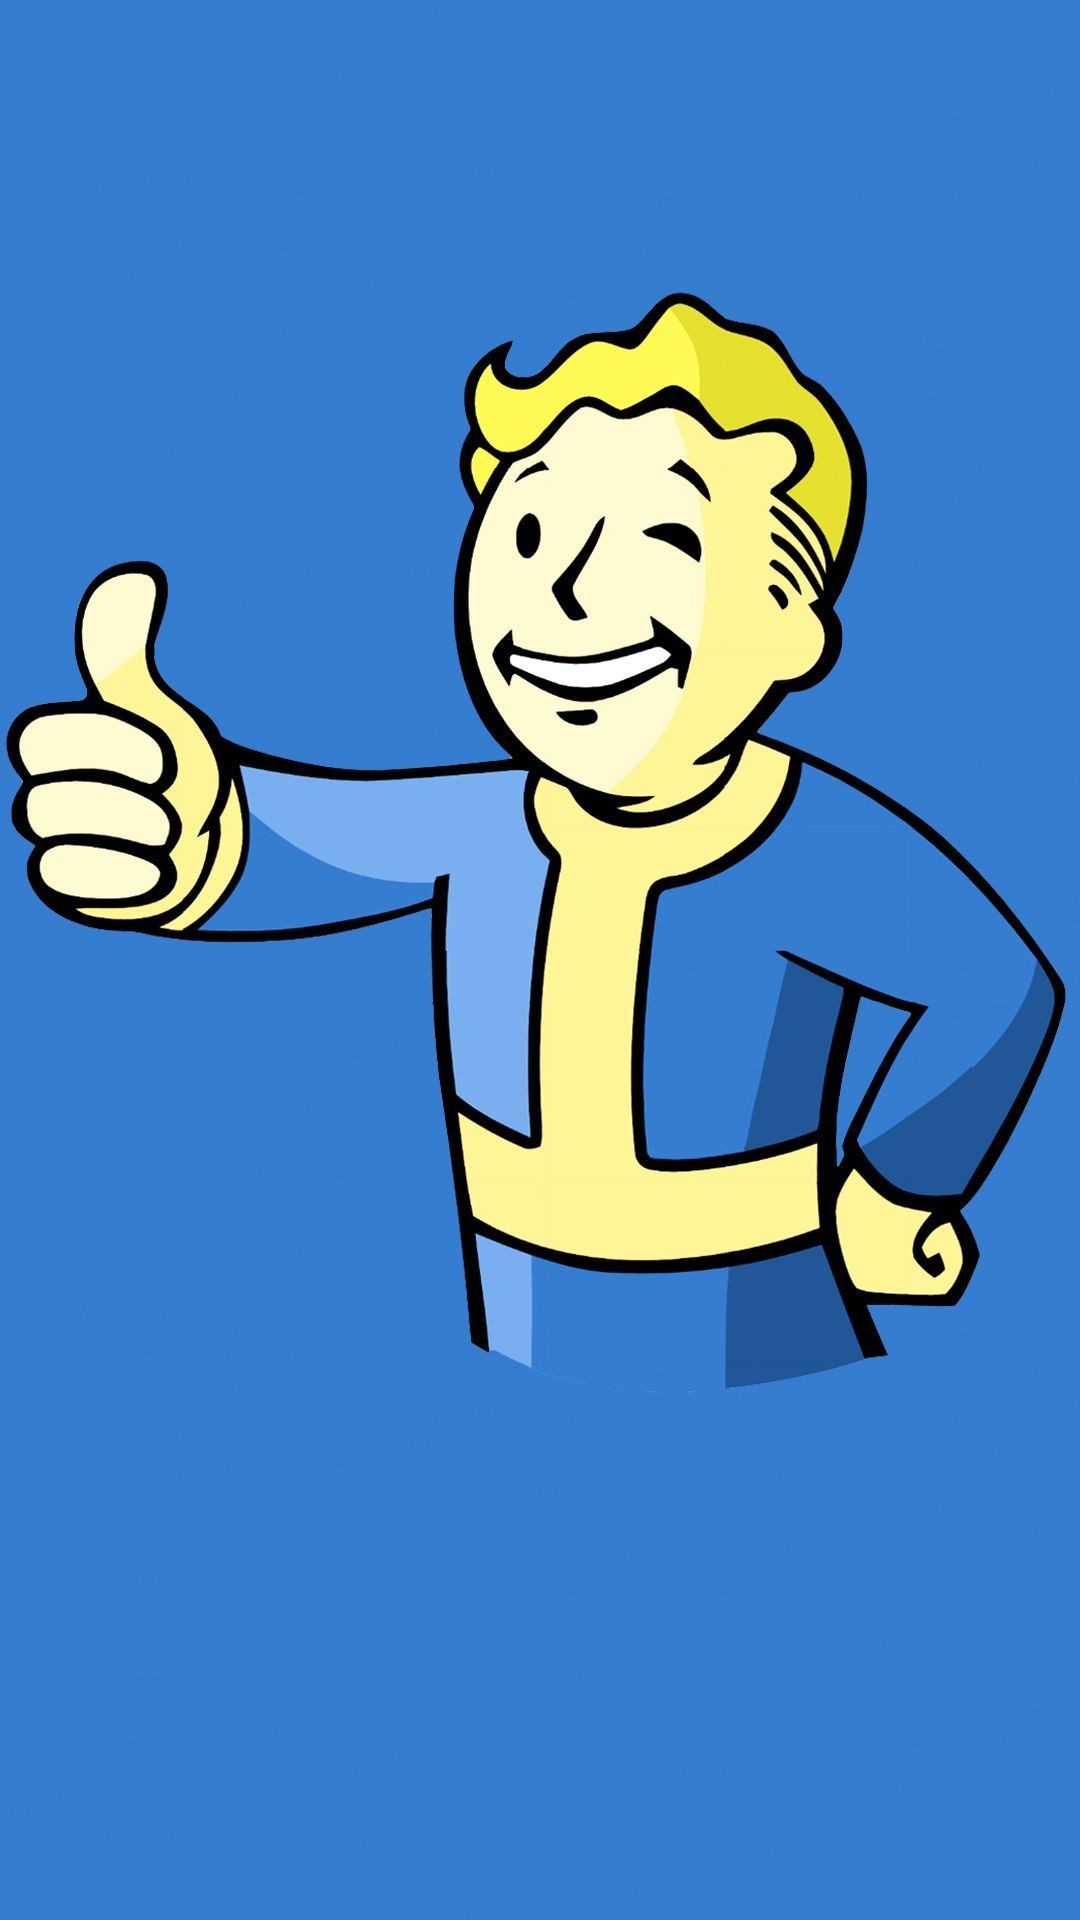 1080x1920 Fall Out Boy Wallpapers Hd Luxury Fallout 4 iPhone Wallpaper Unique Vault Boy  Wallpaper All Wallpapers